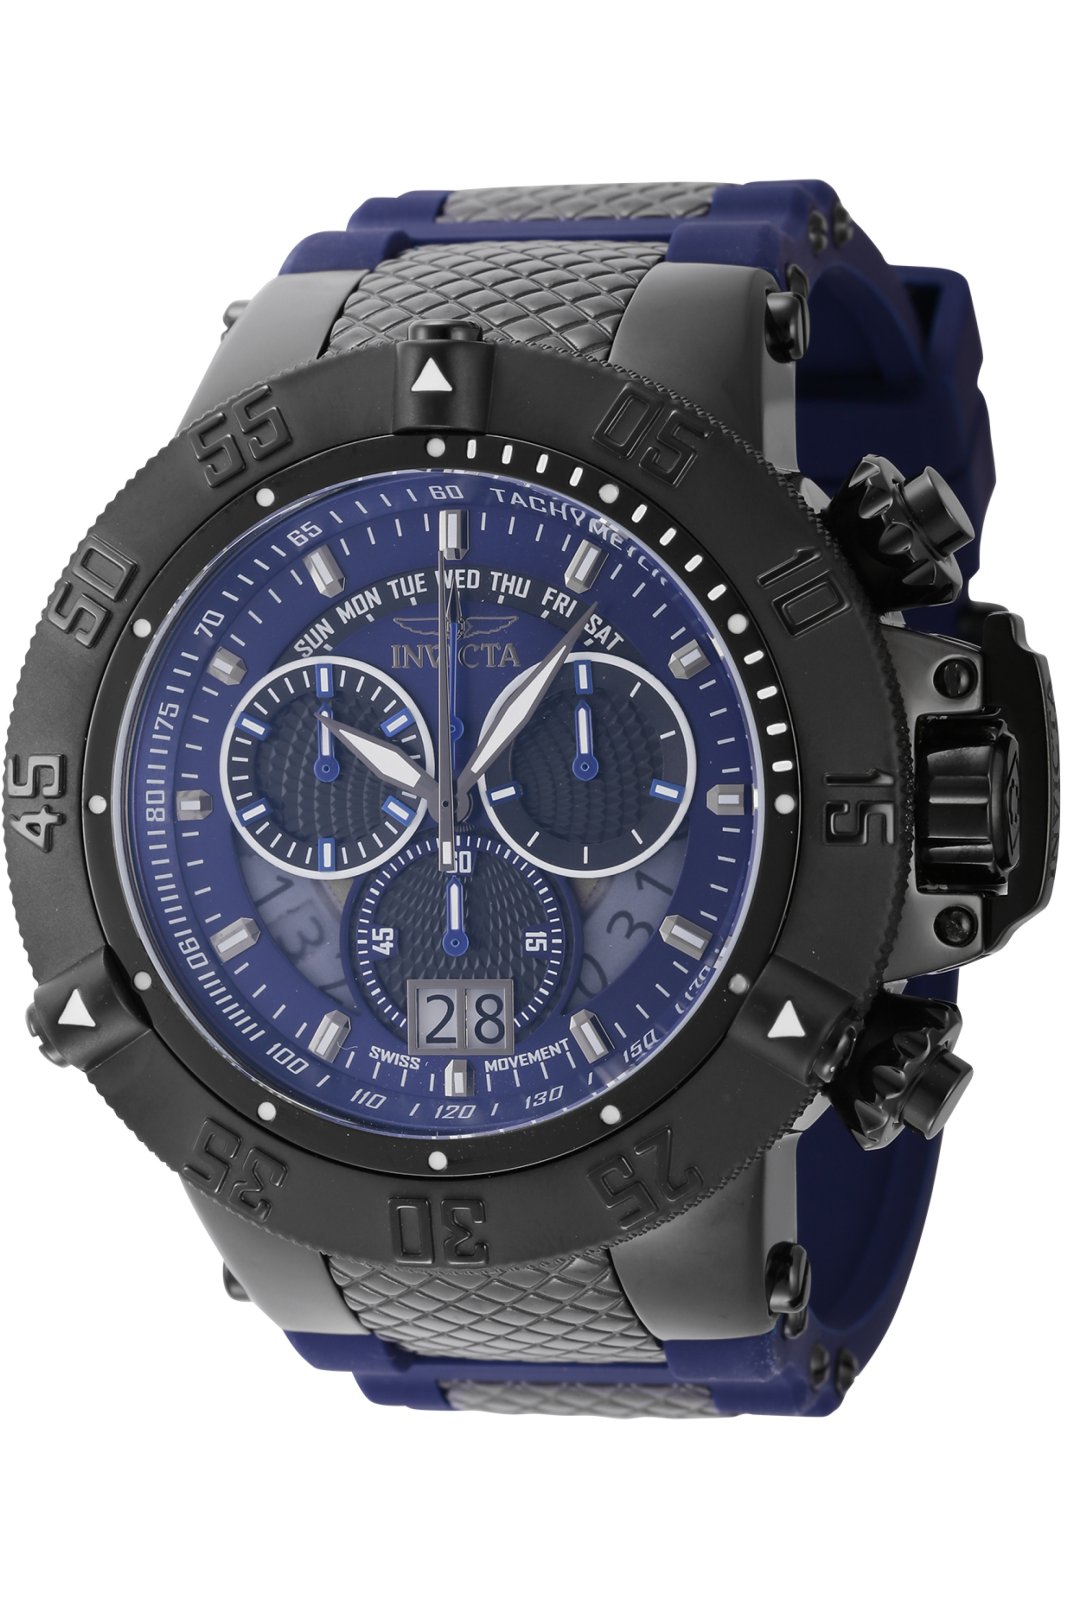 Invicta Watch - III 44233 - Official Invicta Store Buy Online!